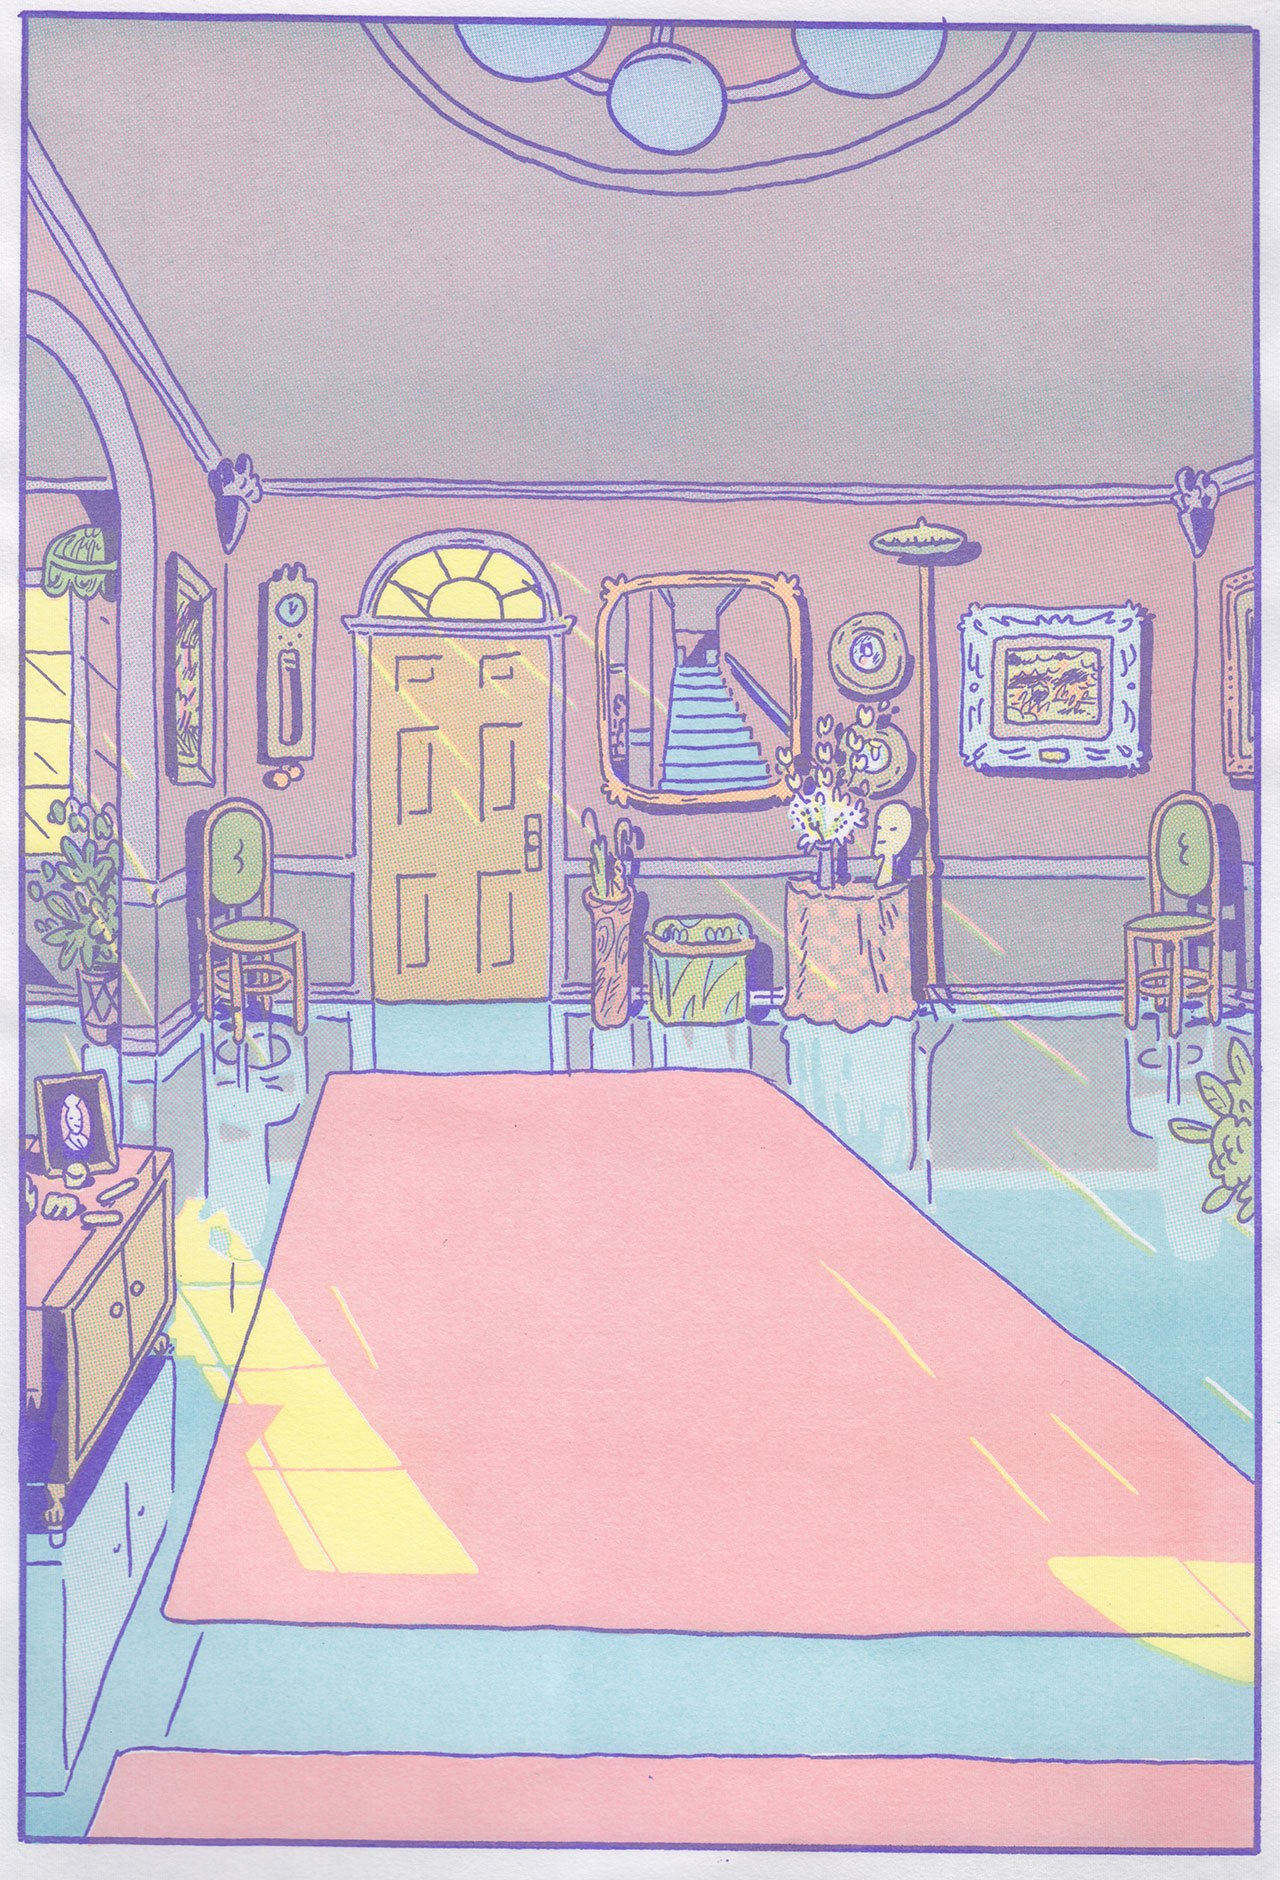 Hard Home - a risograph diptych